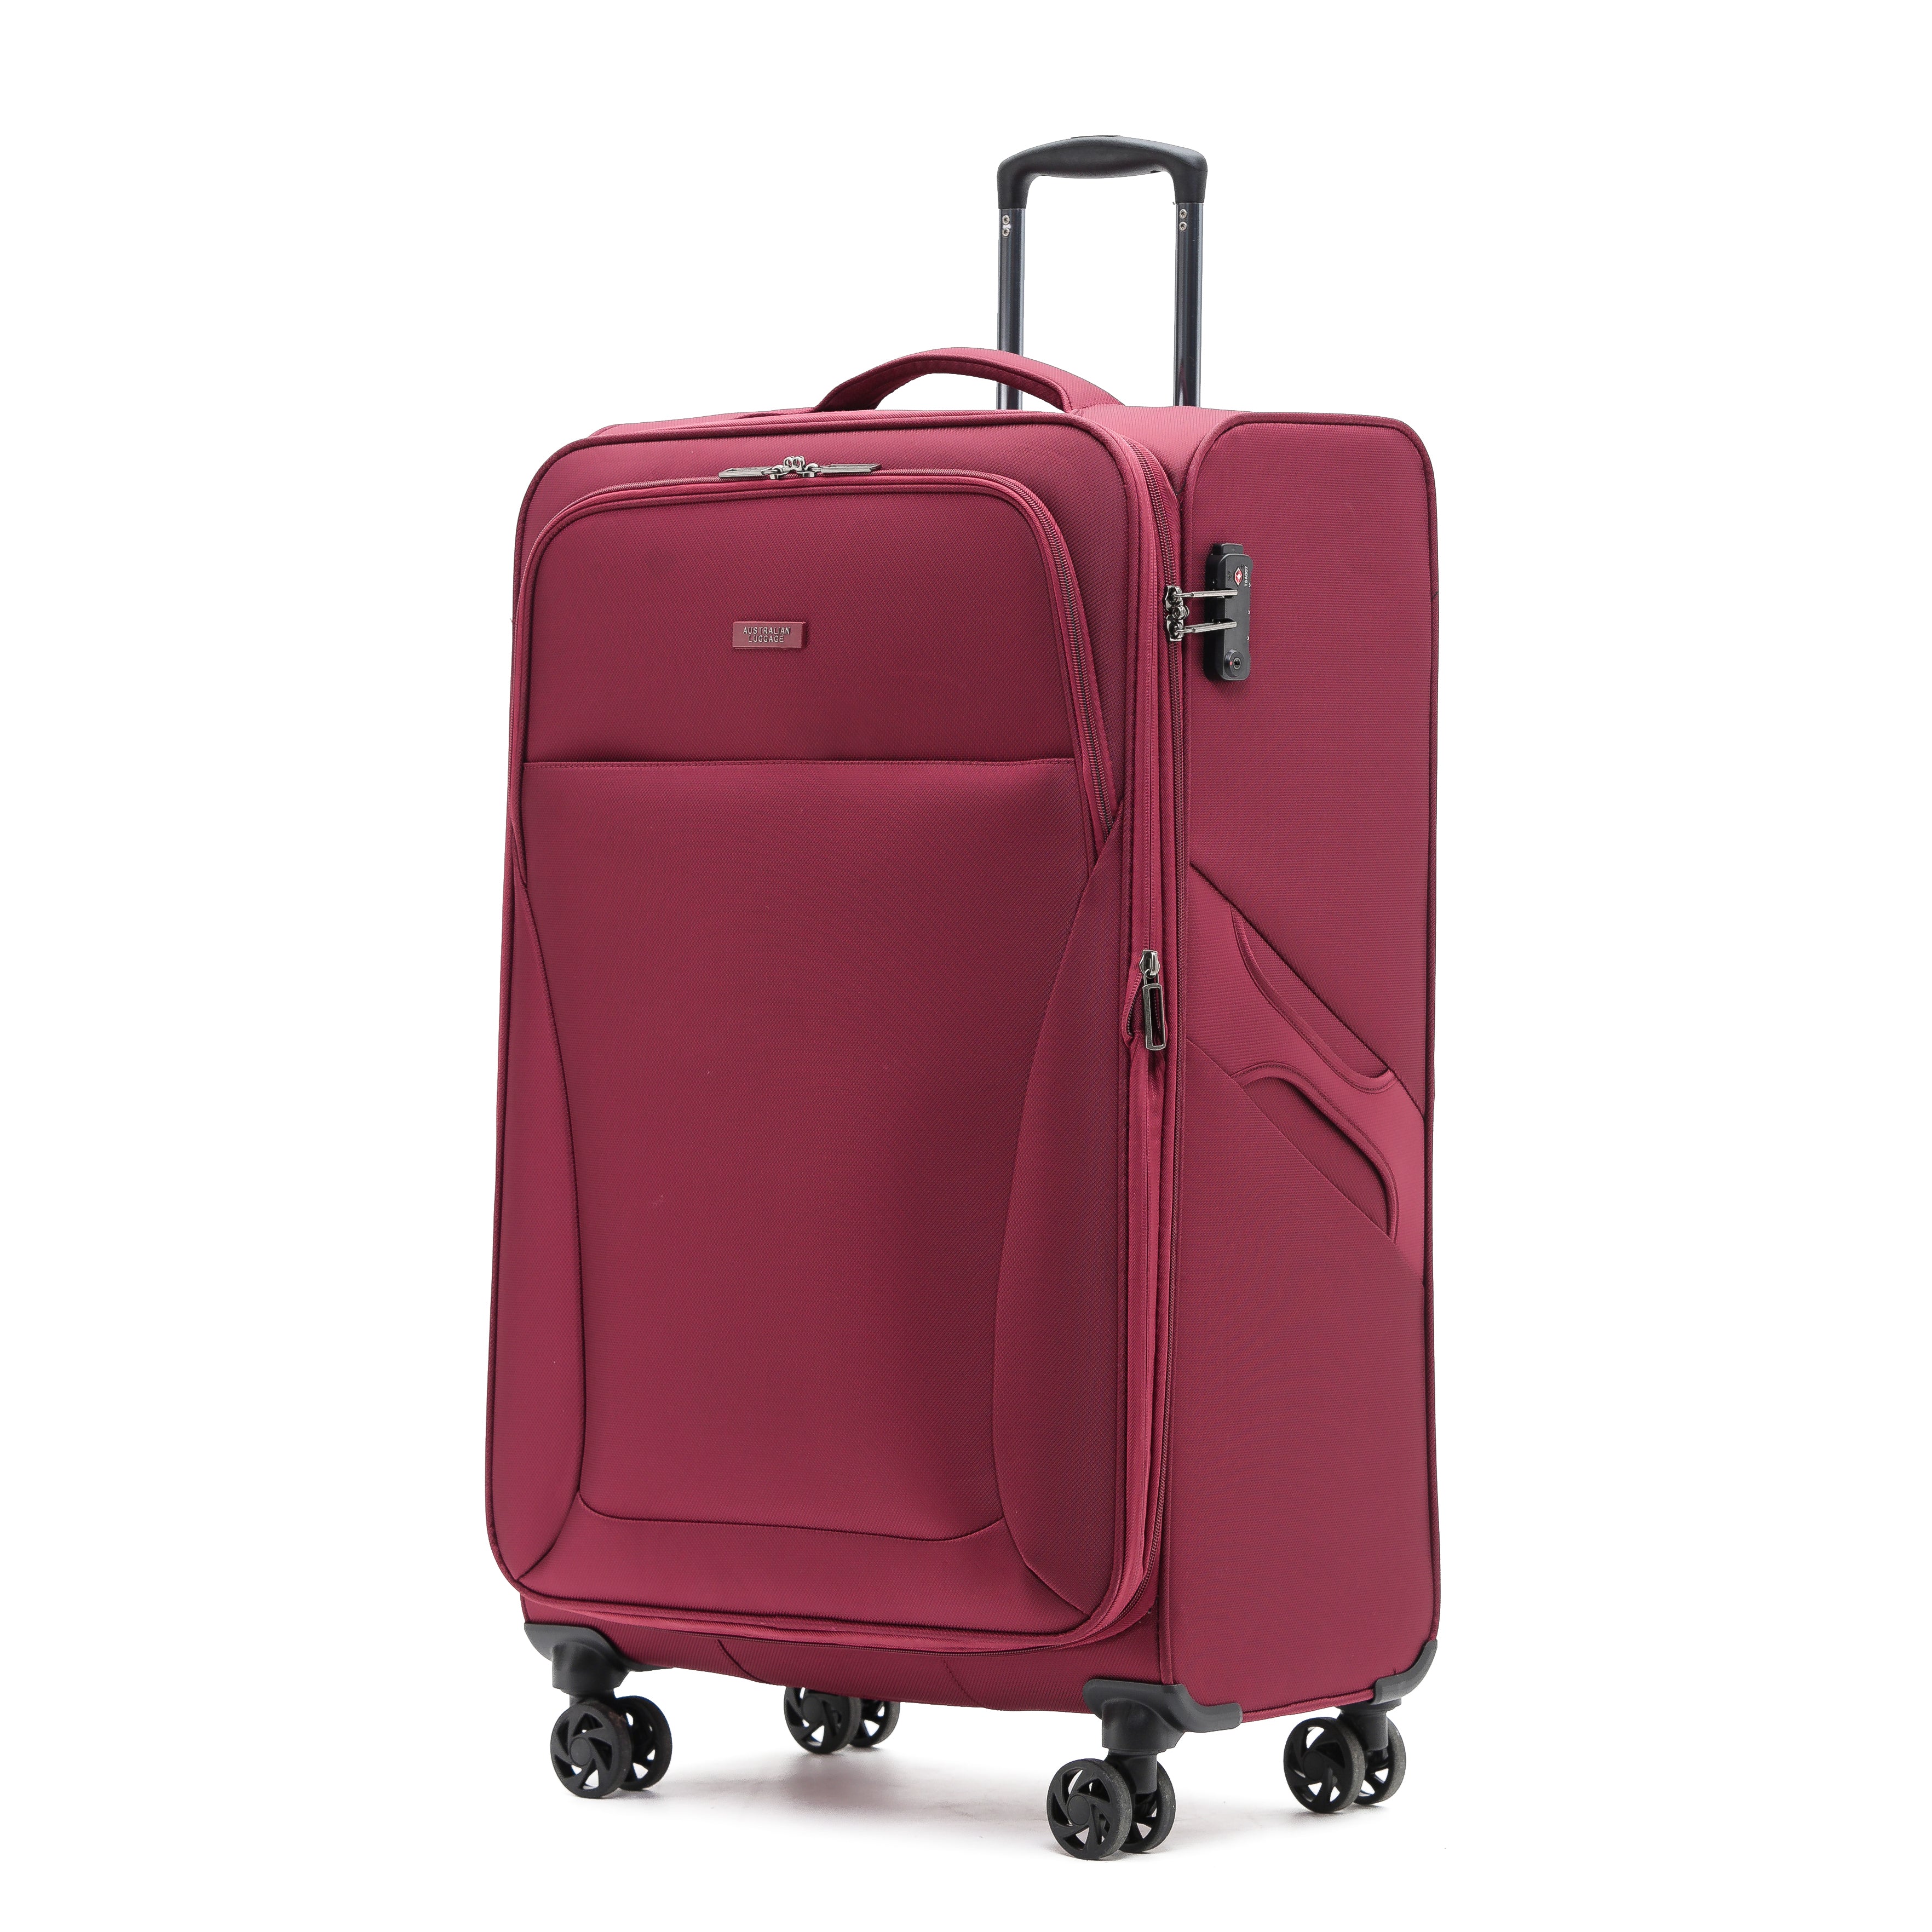 Aus Luggage - WINGS Set of 3 Suitcases - Wine-8